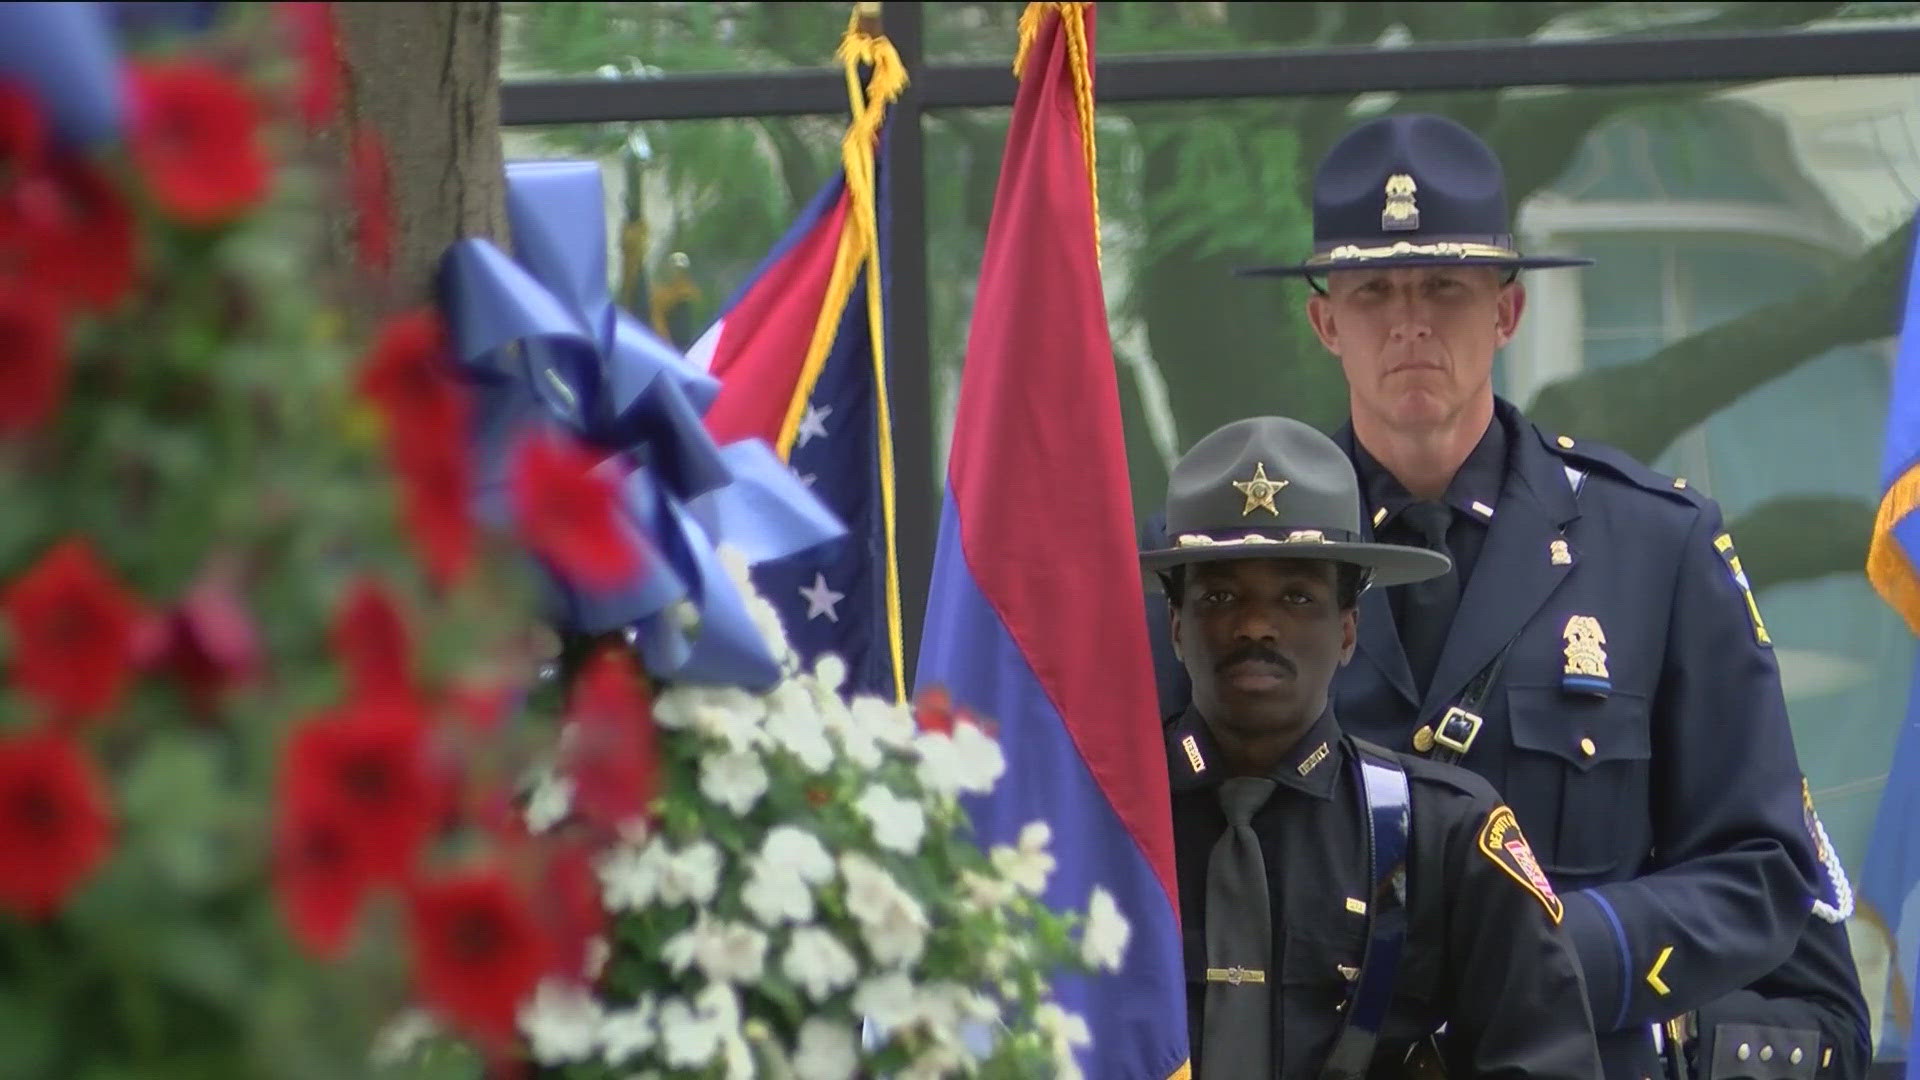 The names of fallen officers from 28 different agencies were read at the Toledo Police Department's memorial service Tuesday morning.